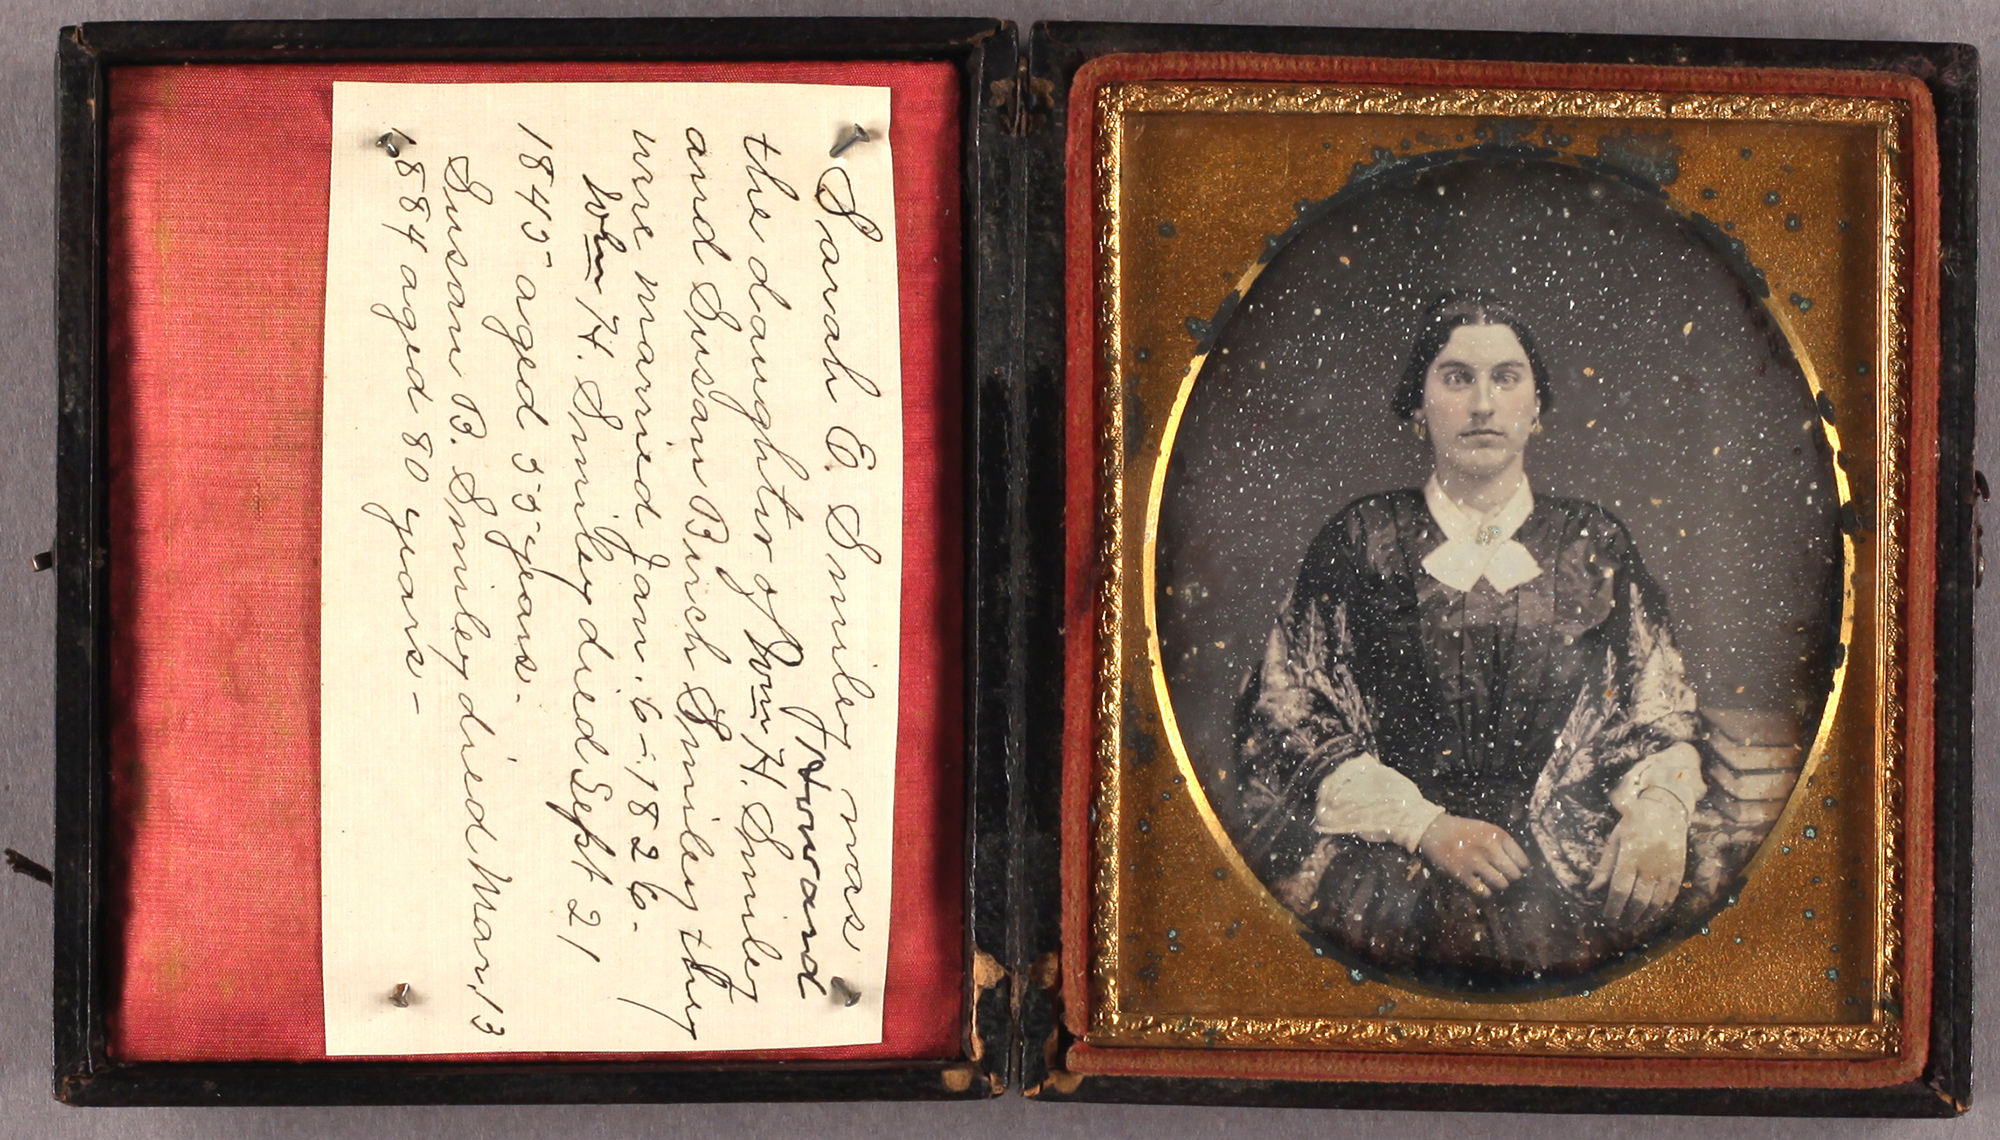 Dating Ambrotypes And Daguerreotypes